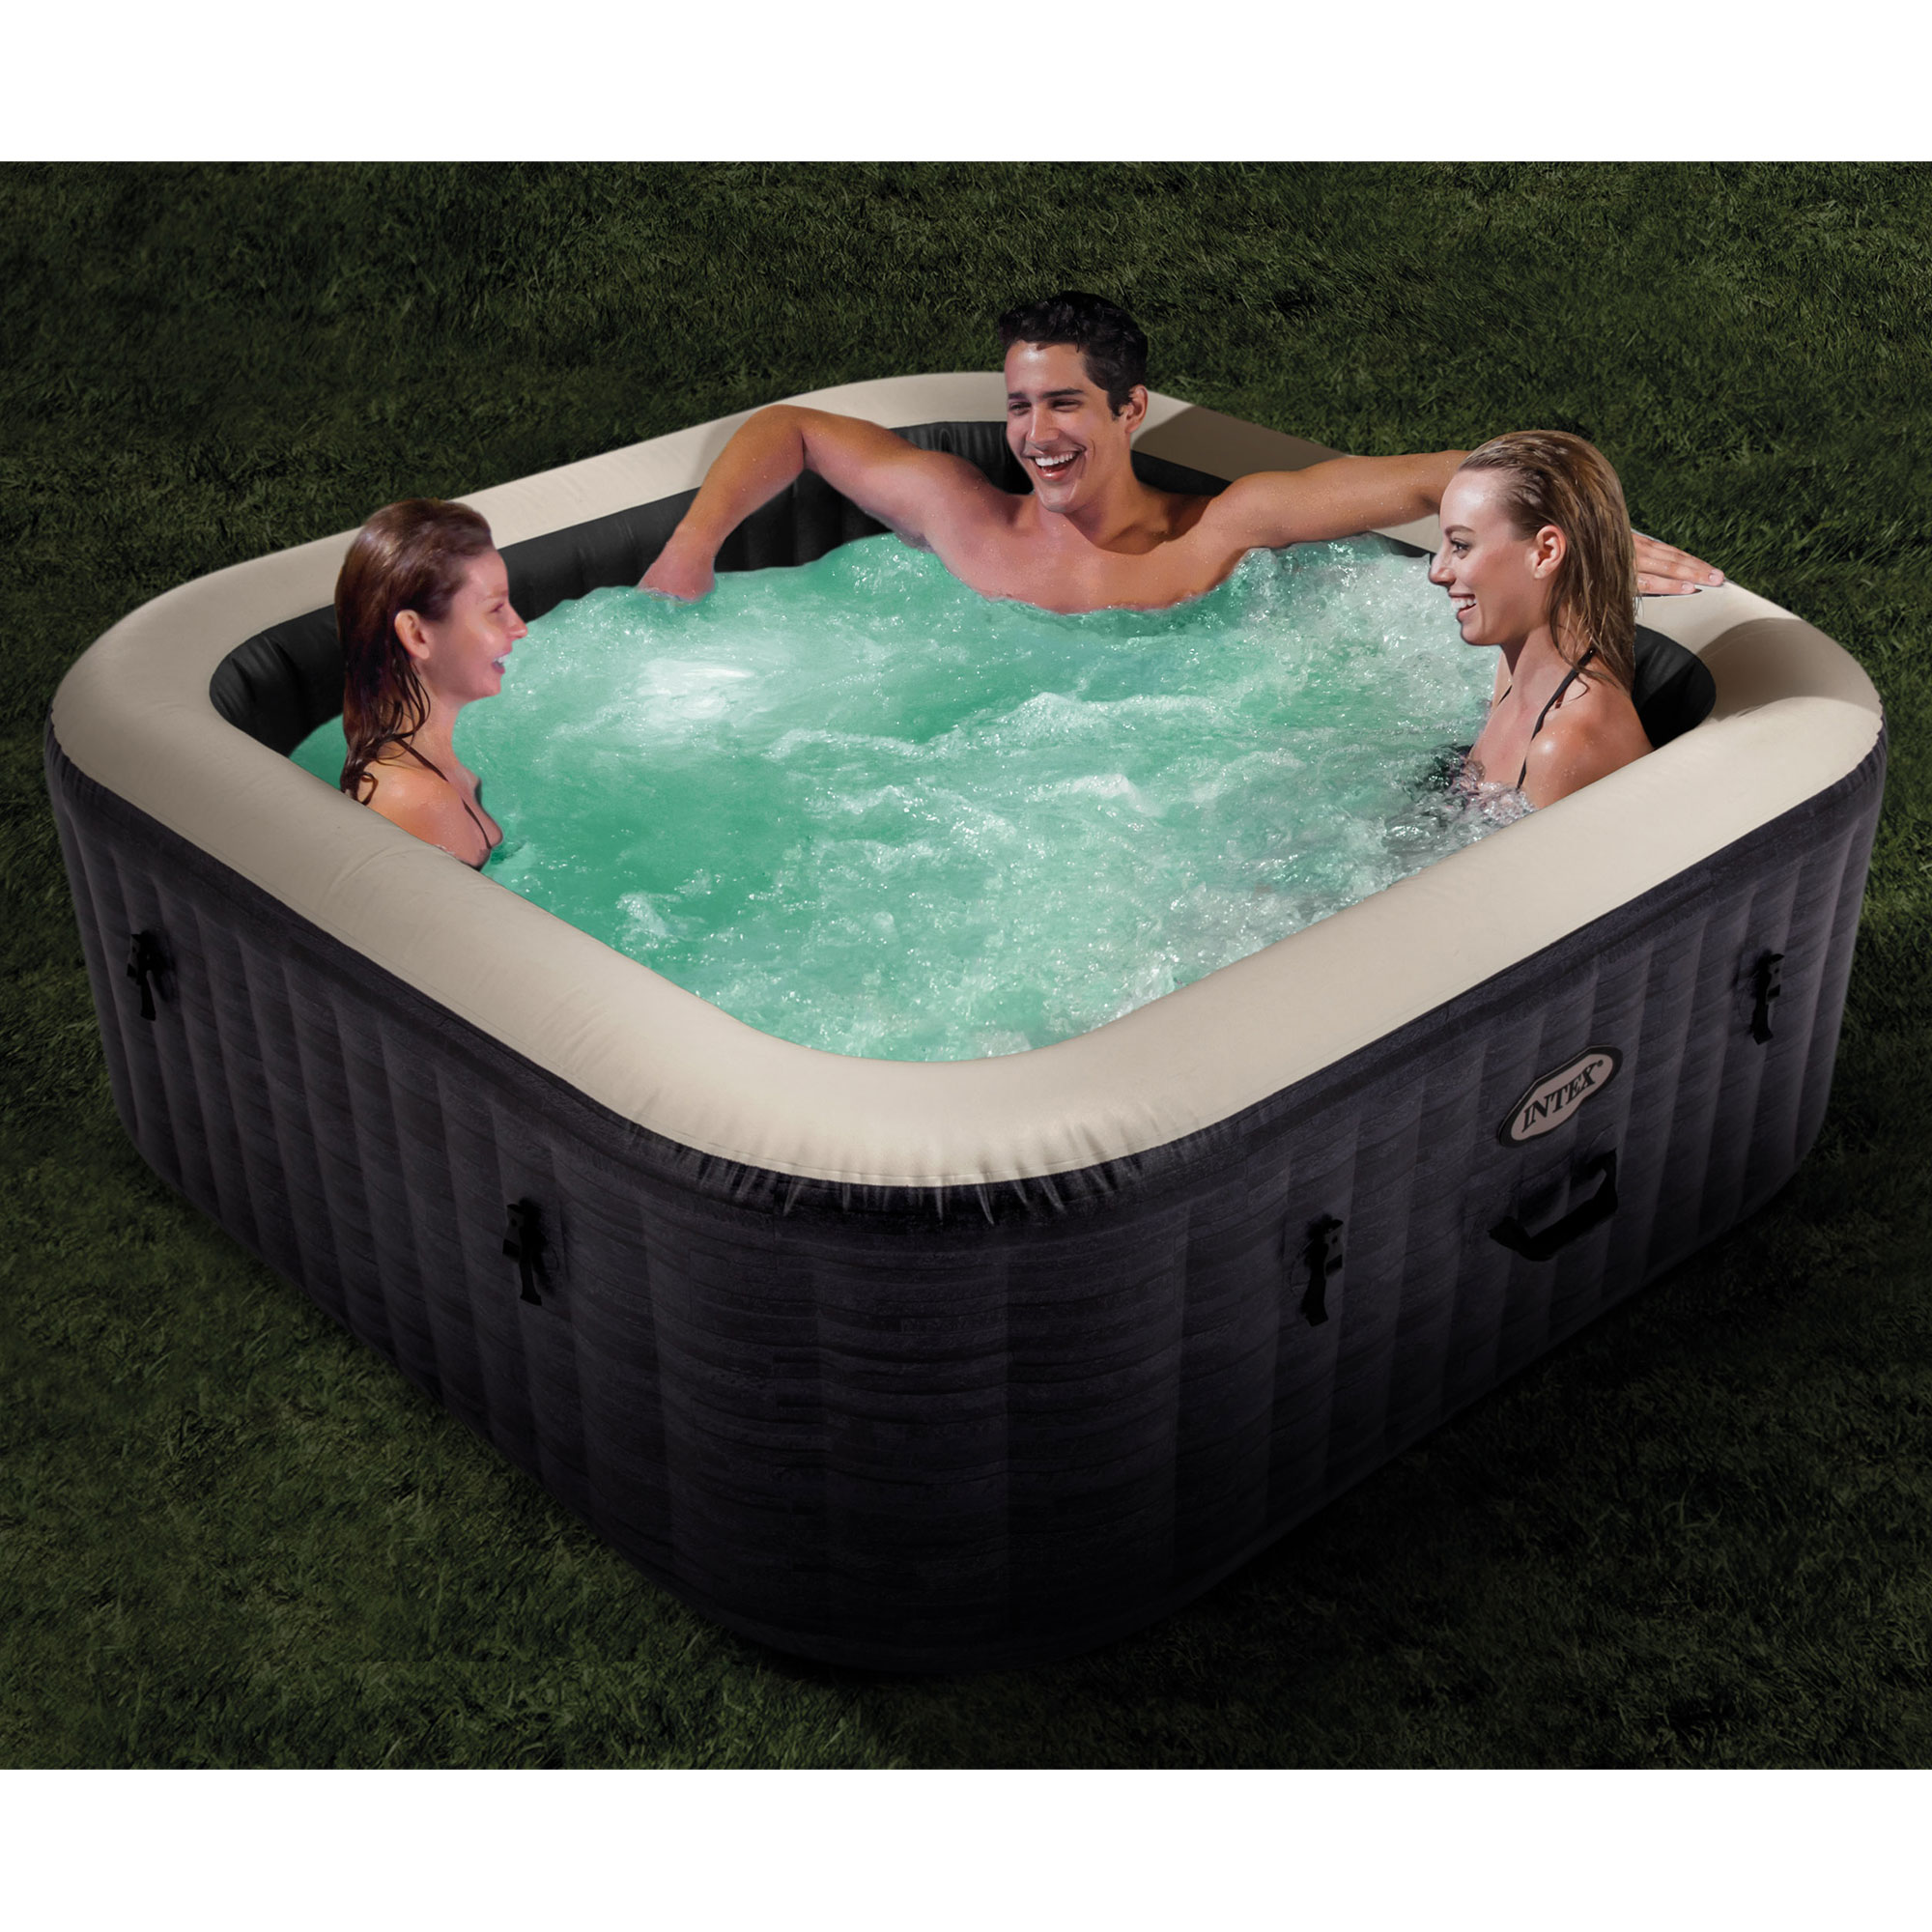 Intex PureSpa Plus Greystone Hot Tub, 94 x 28", with Cup Holder 4-Pack 